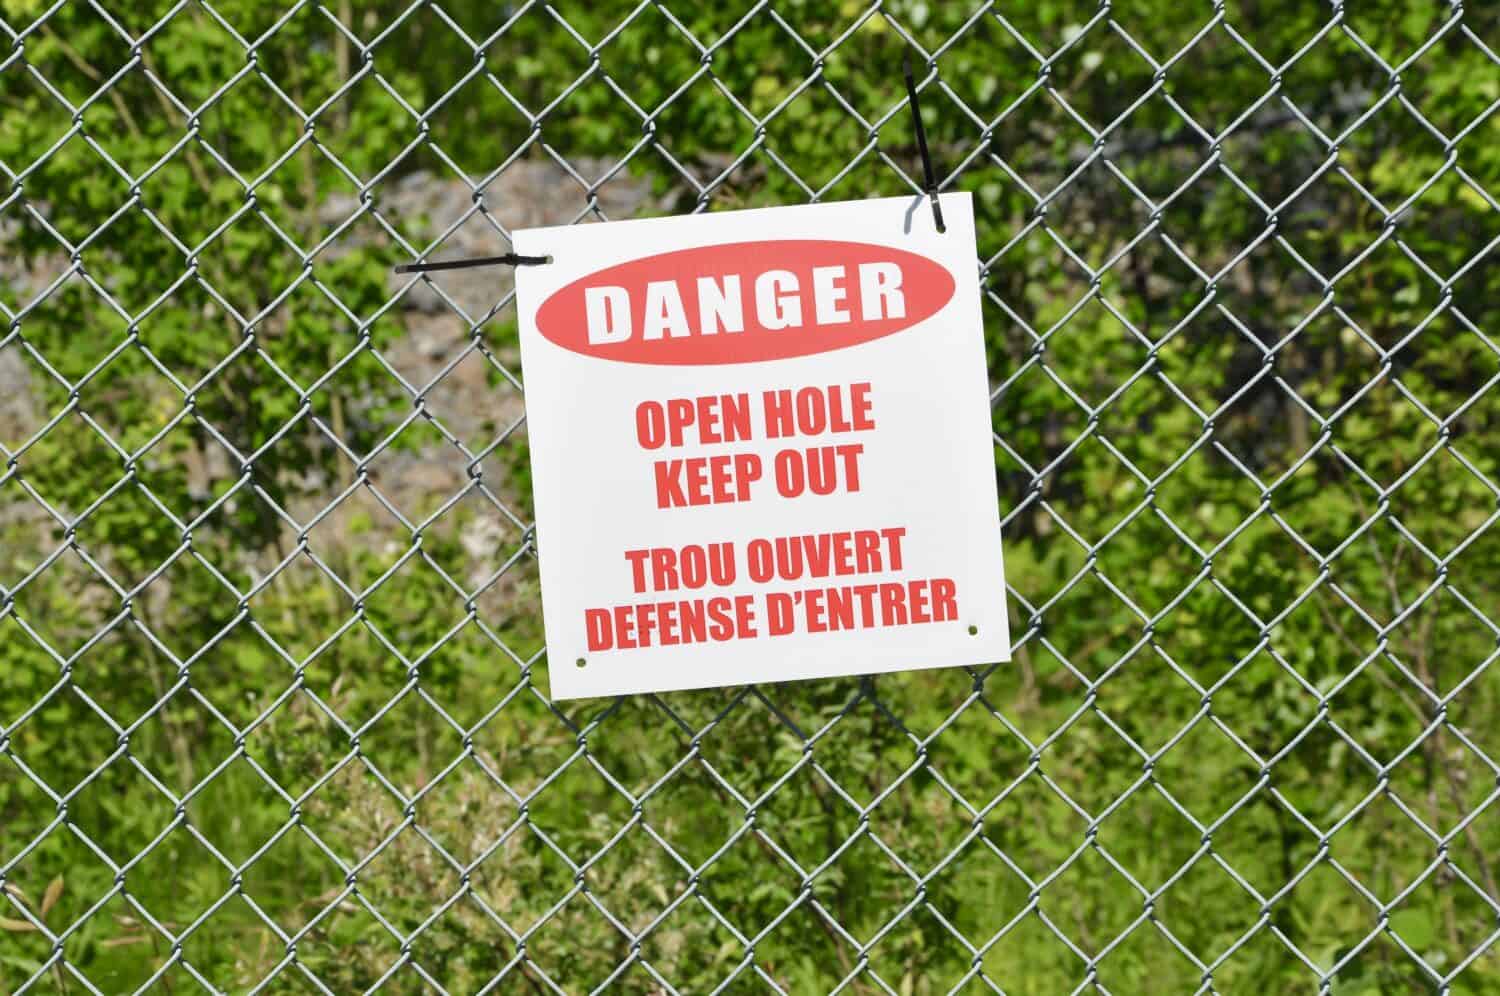 Danger open hole keep out sign